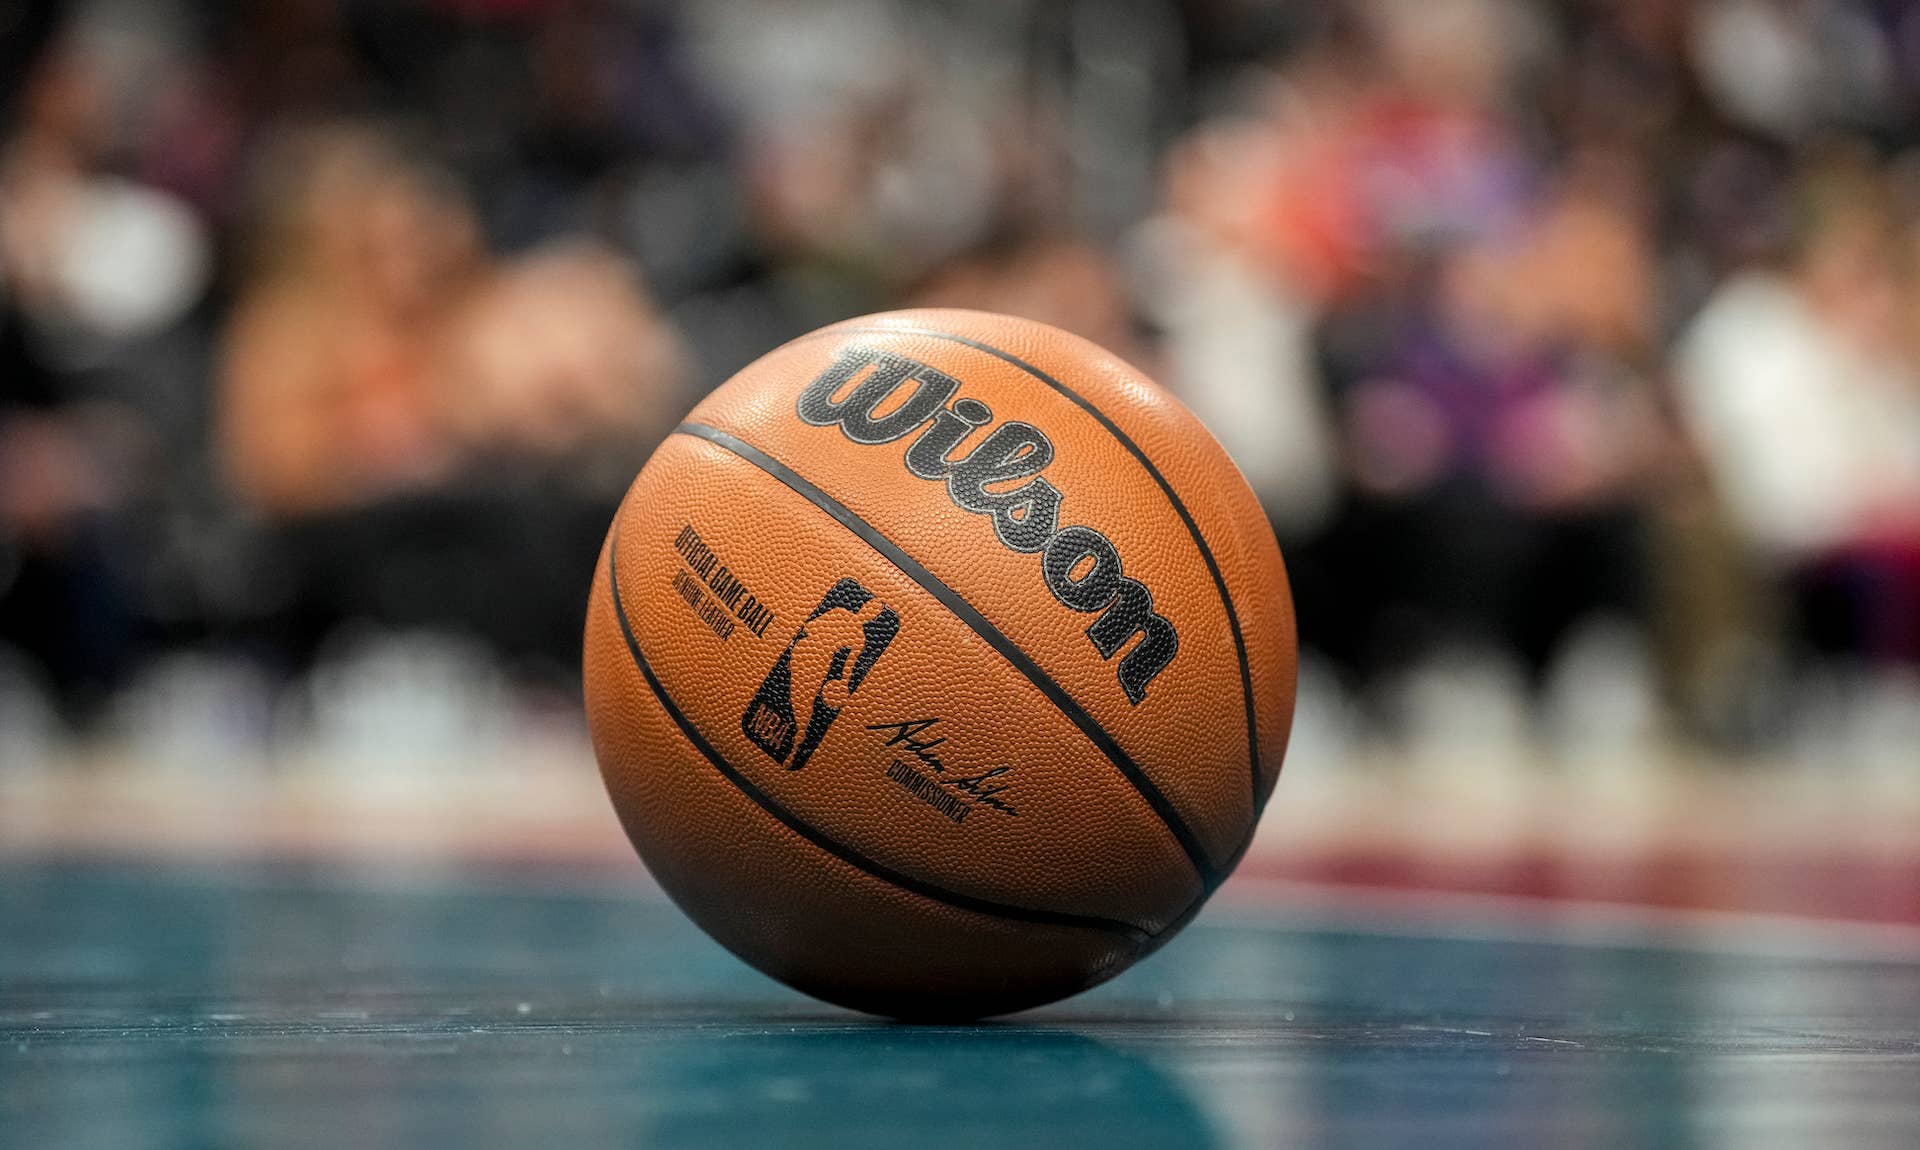 An NBA basketball as seen on the sideline of a game between the Detroit Pistons and Charlotte Hornets